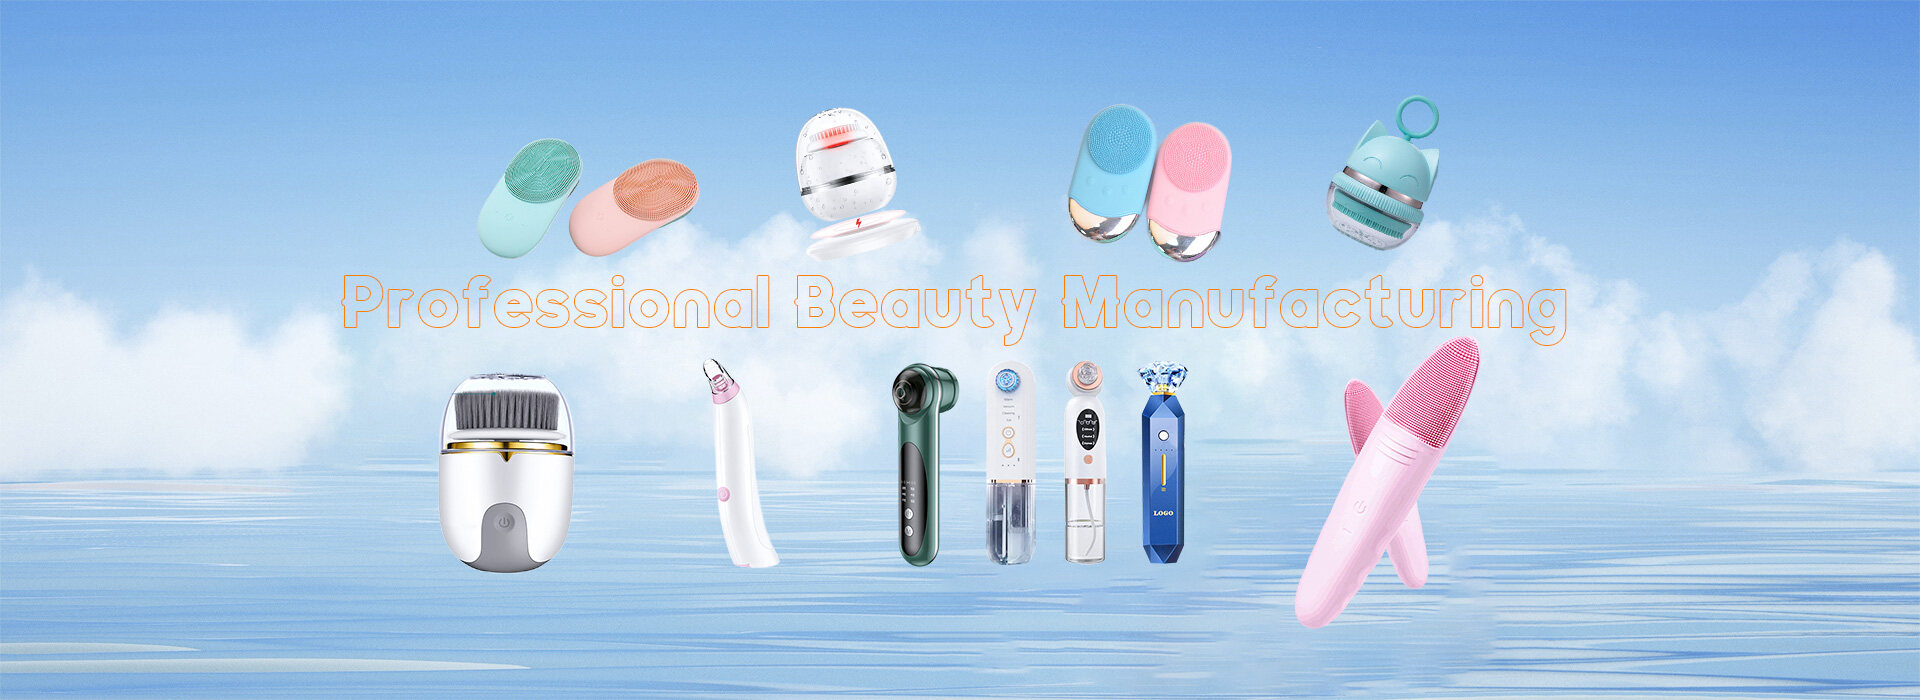 Pro Hair Removal Wax Heater Wax Machine Desktop Candle Making Machine Melting Pot 3L Stainless Steel Paraffin Wax Warmer Pot,Professional Electric Plug in Stainless Wax Warmer Machine Hair Removal Kit Wax Heater With Thermal Insulation Effect,6.8L Electric Wax Melting Bucket Adjustable Temperature Hair Removal Wax Warmer Machine Paraffin Wax Heater